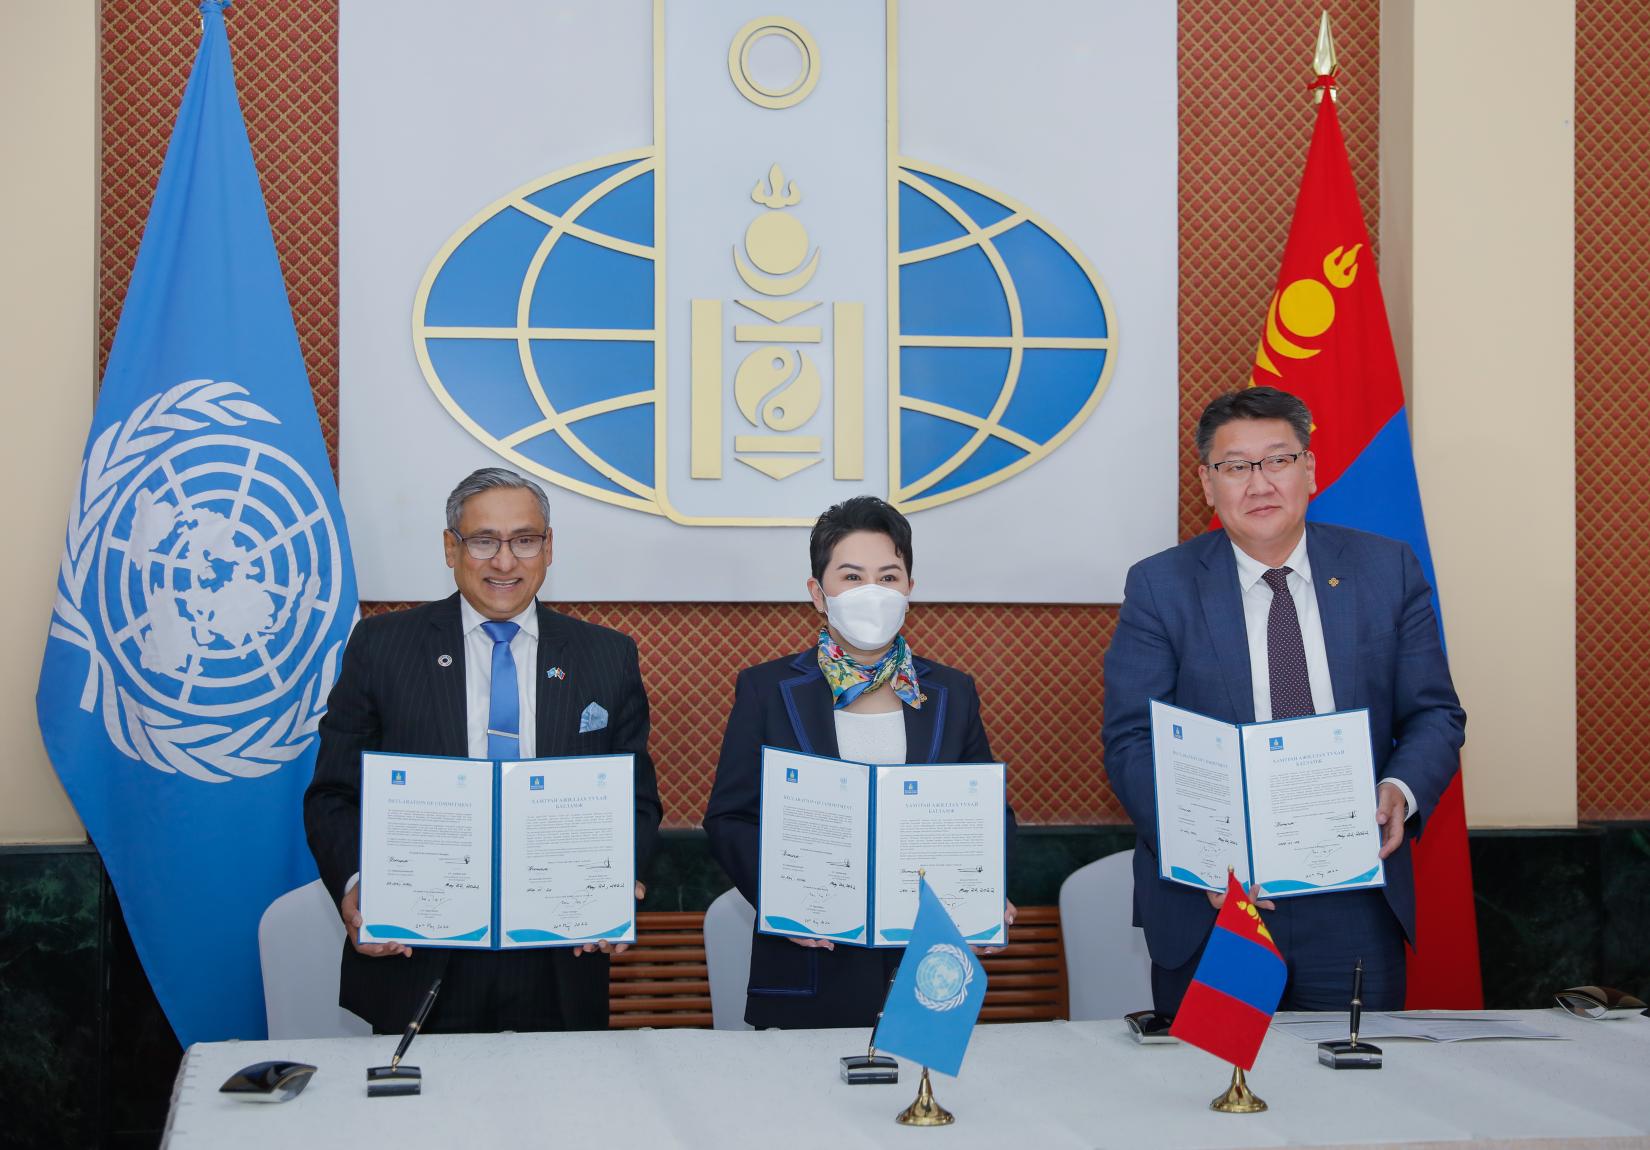 Signing of the UNSDCF